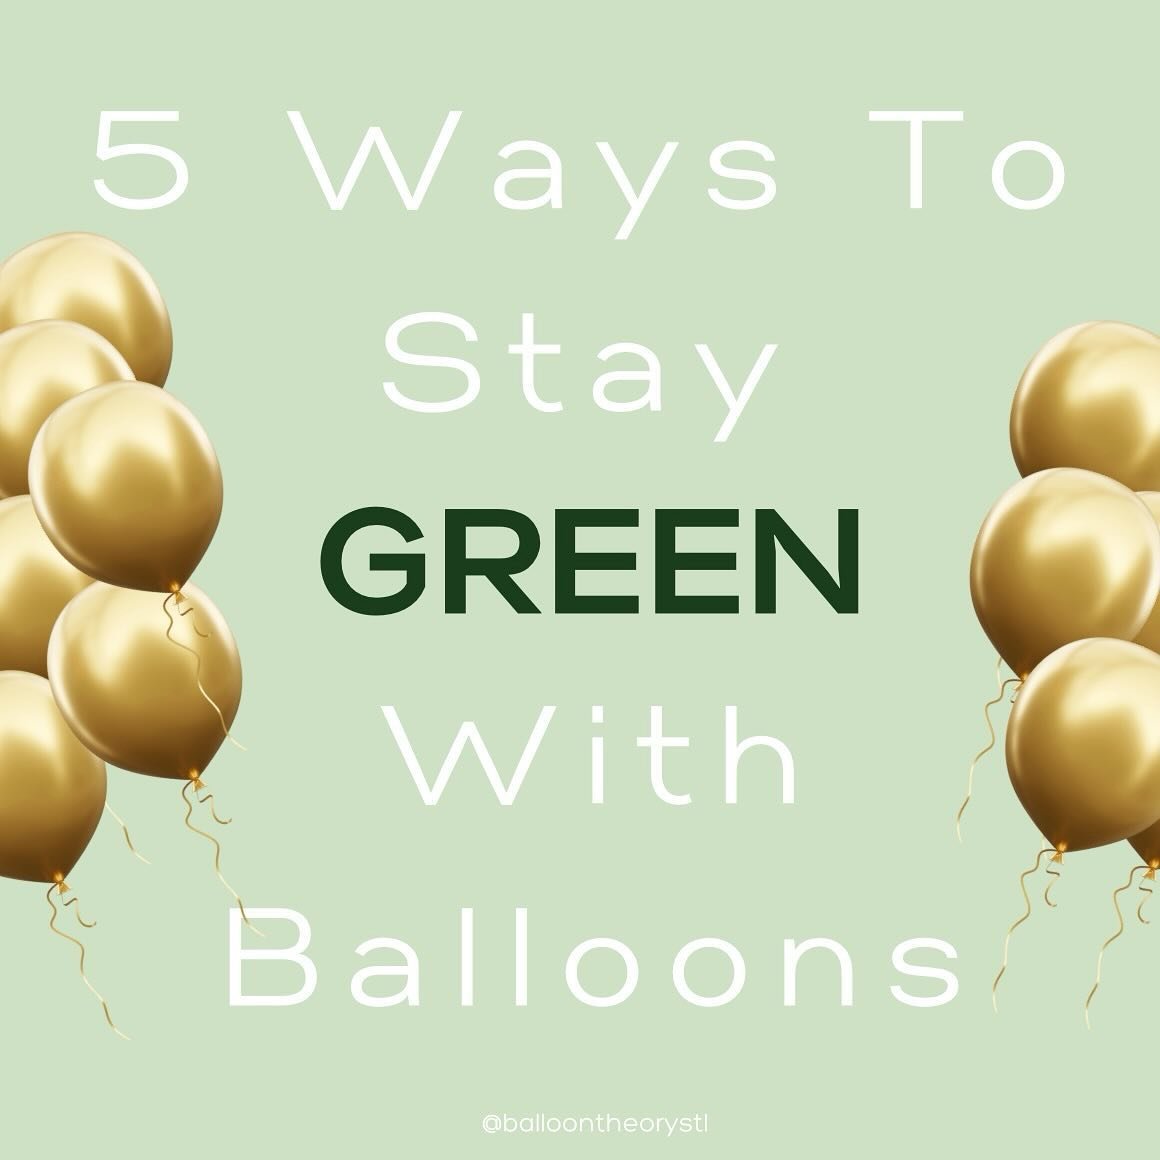 Happy earth day!🌎🌱

Staying green with balloons is super important!

Here are 5 ways to keep our planet clean!

1. Biodegradable Balloons: Opt for balloons made from biodegradable materials like natural latex, which decomposes faster and reduces en